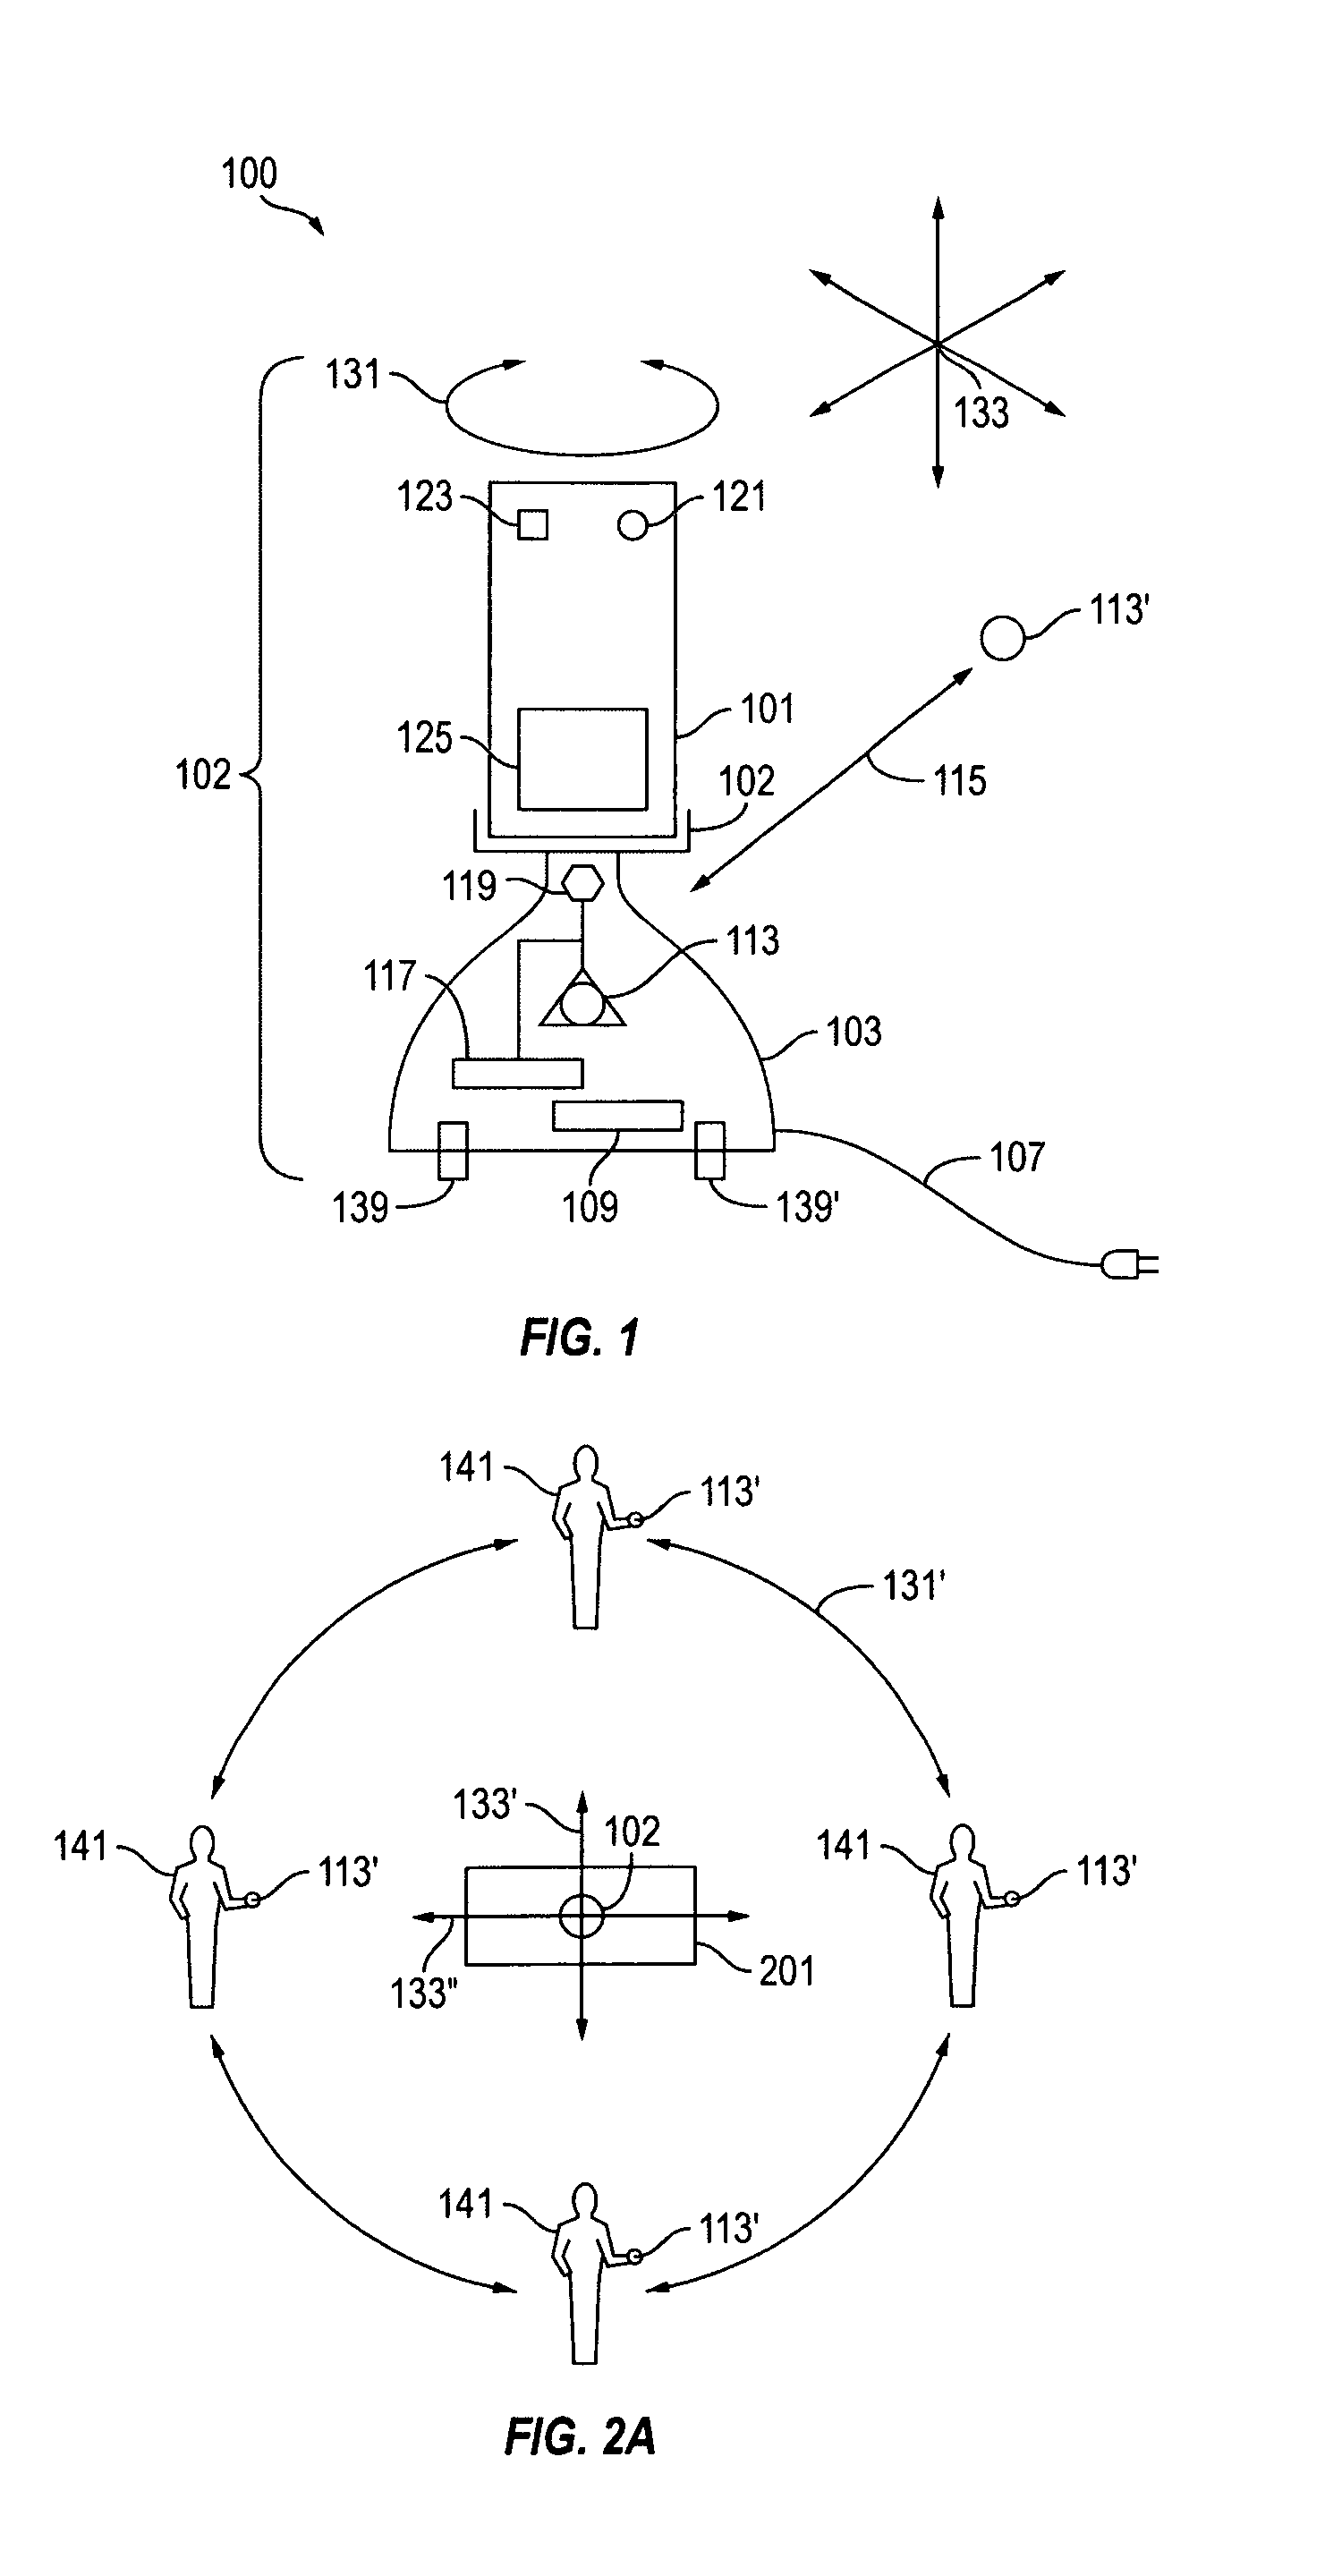 Content data capture, display and manipulation system